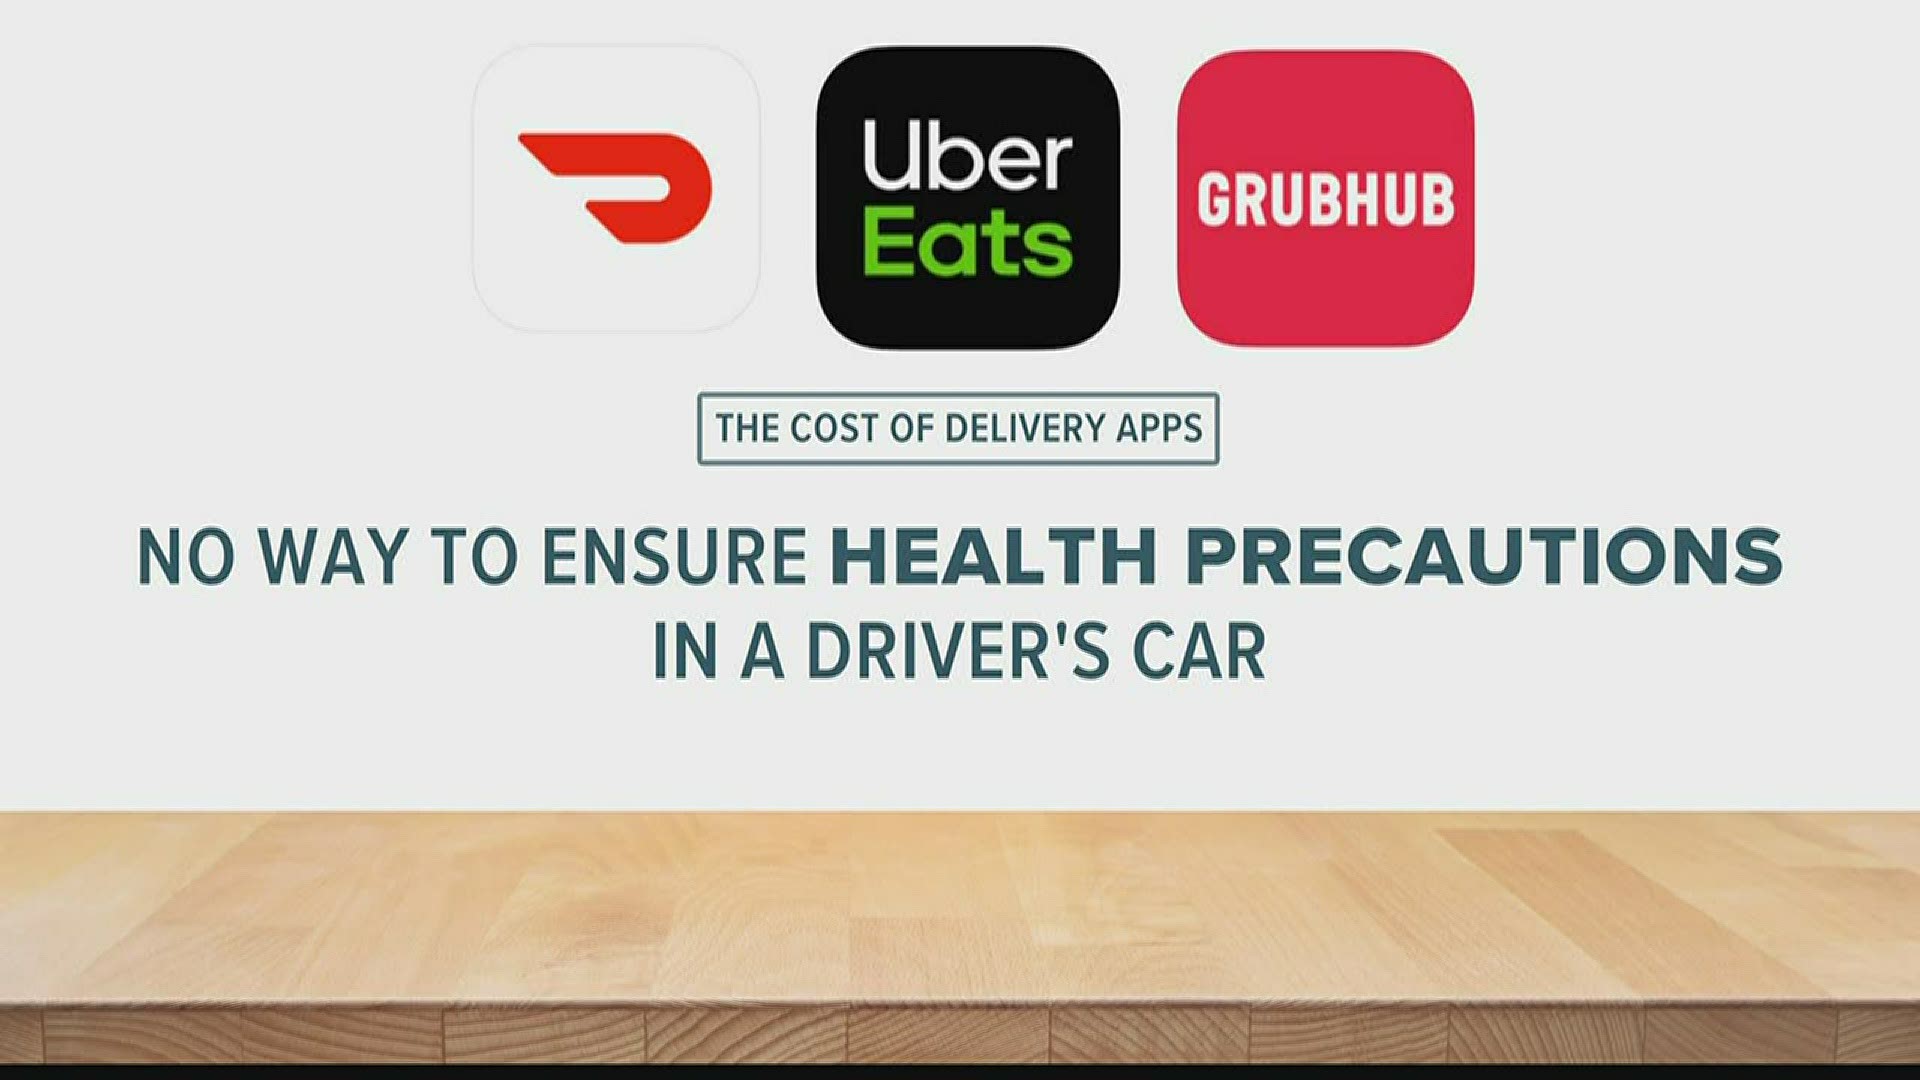 Health concerns aren't the only reason restaurant owners are steering away from delivery apps